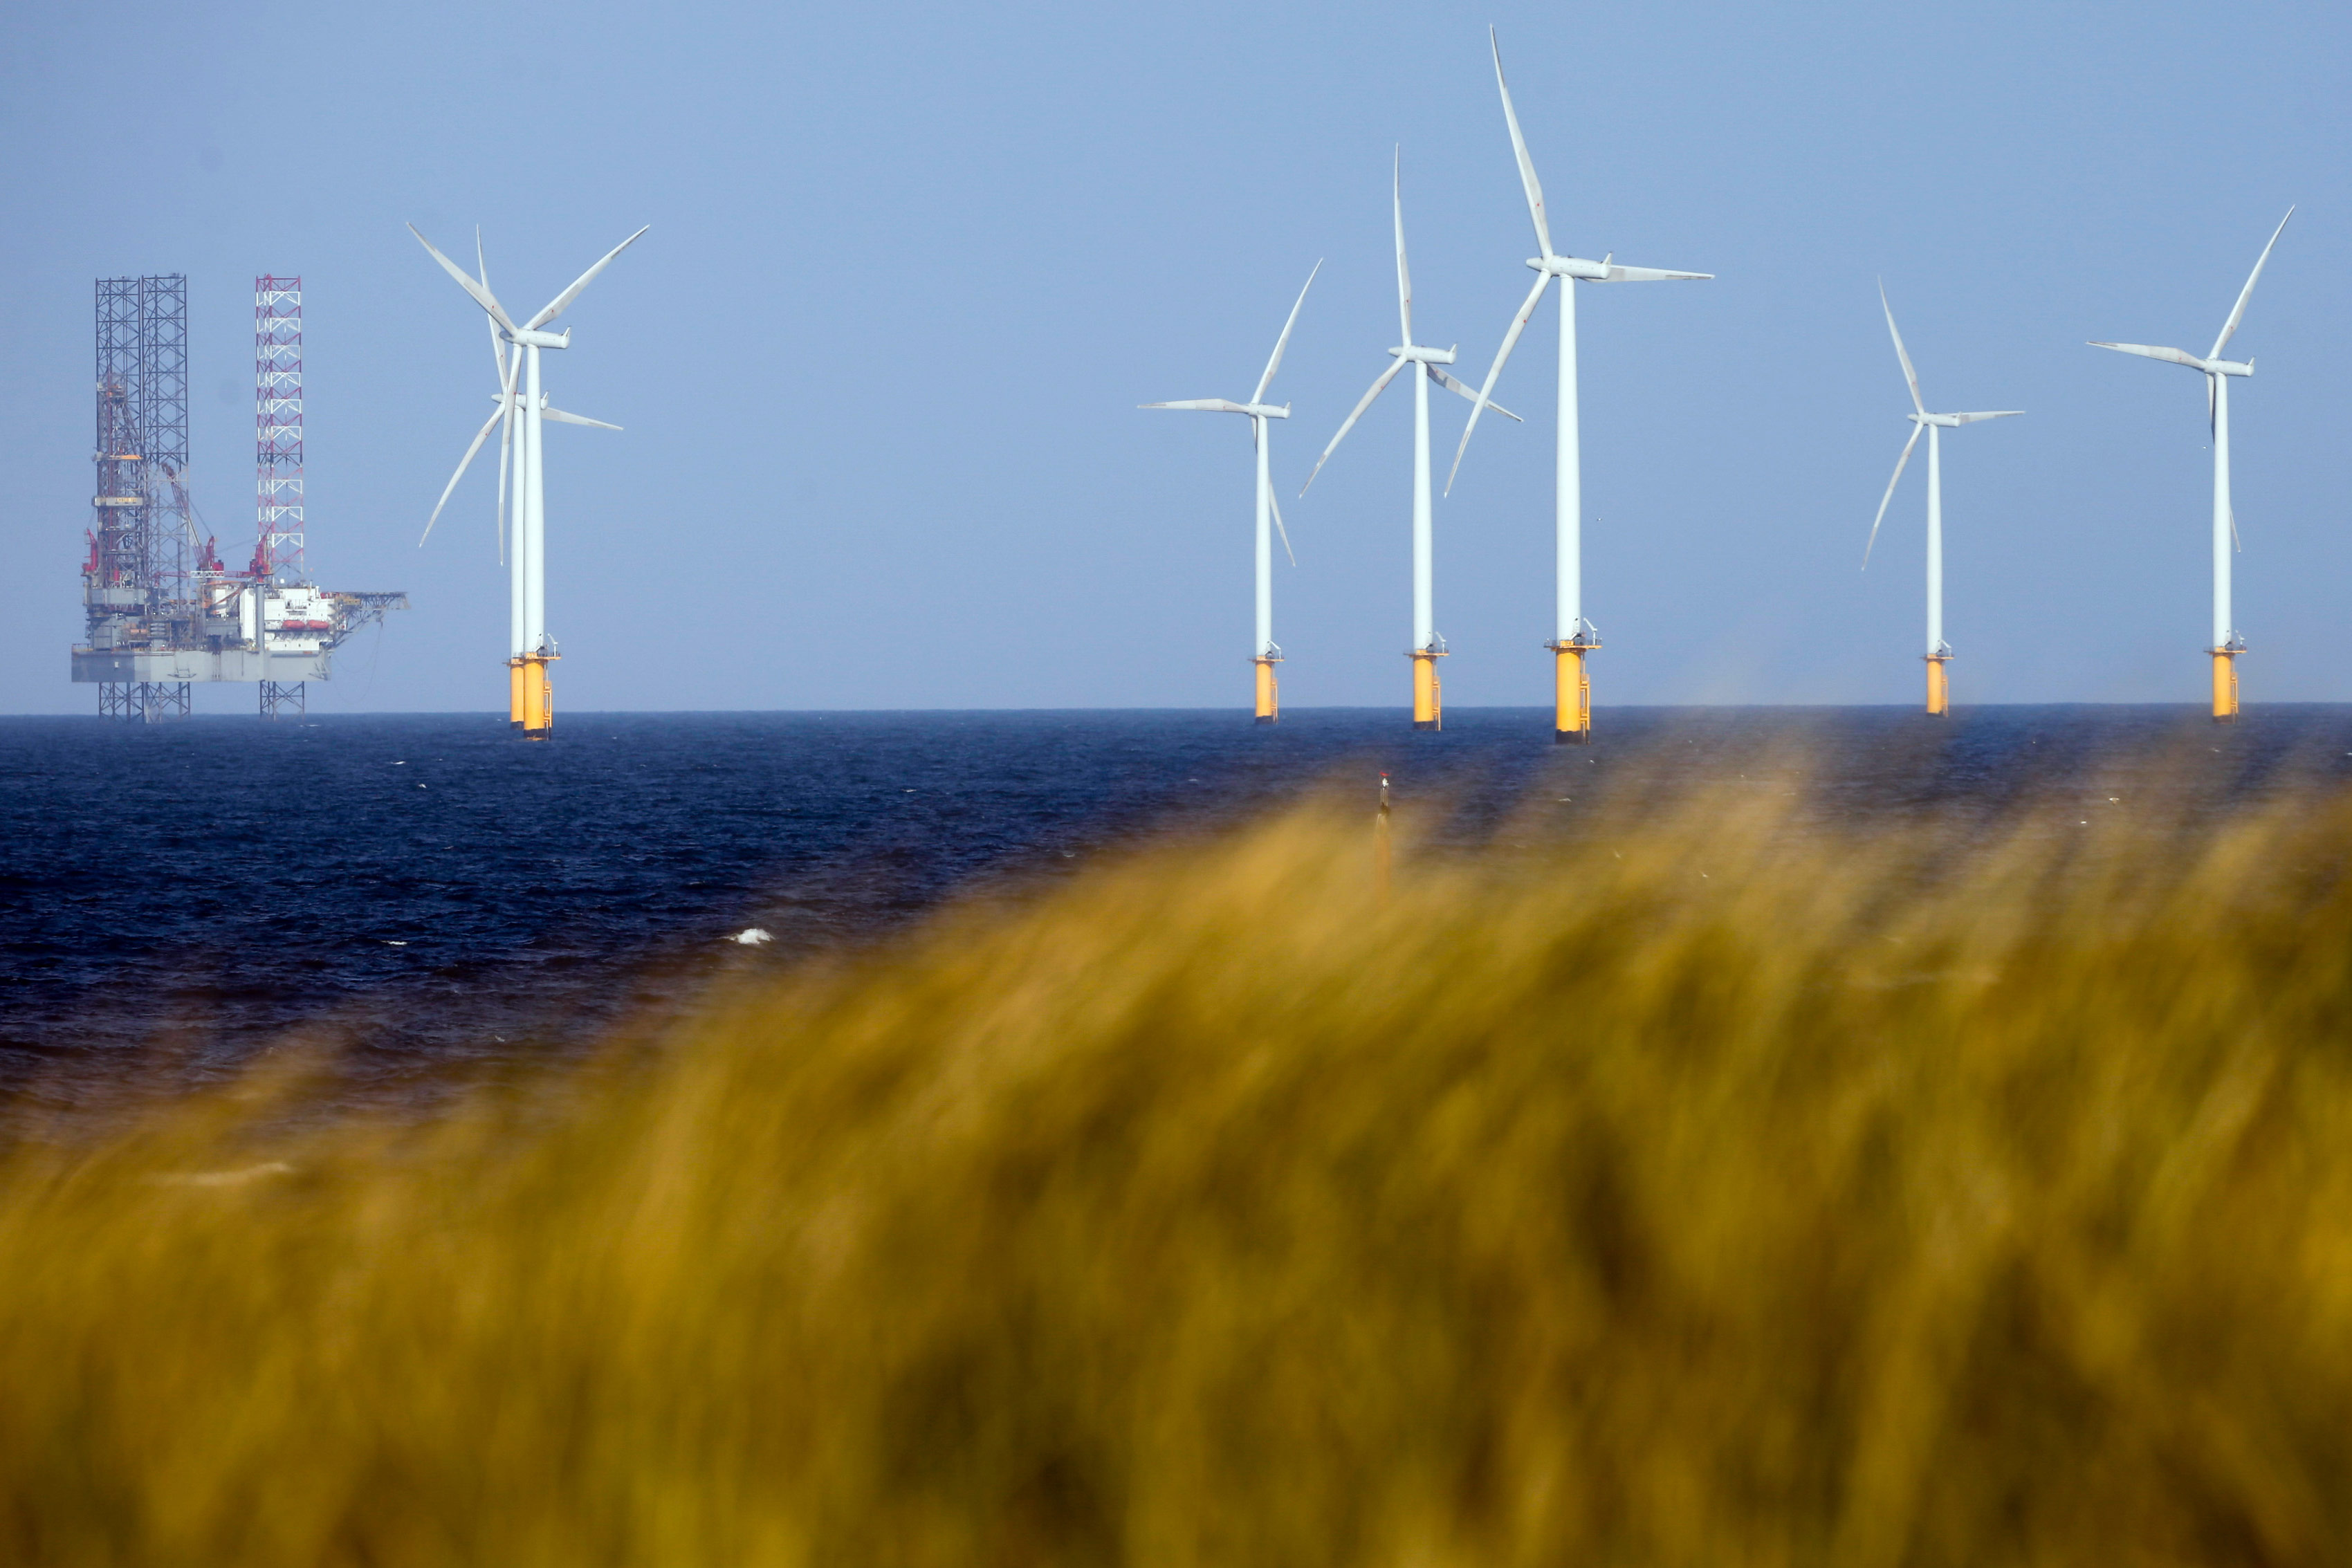 A jack-up rig stands near to Teesside Offshore Wind Farm, operated by EDF Energy Renewables Ltd., in Hartlepool, U.K., on Wednesday, May 3, 2017. The wind farm has a capacity of 62.1 megawatts.
